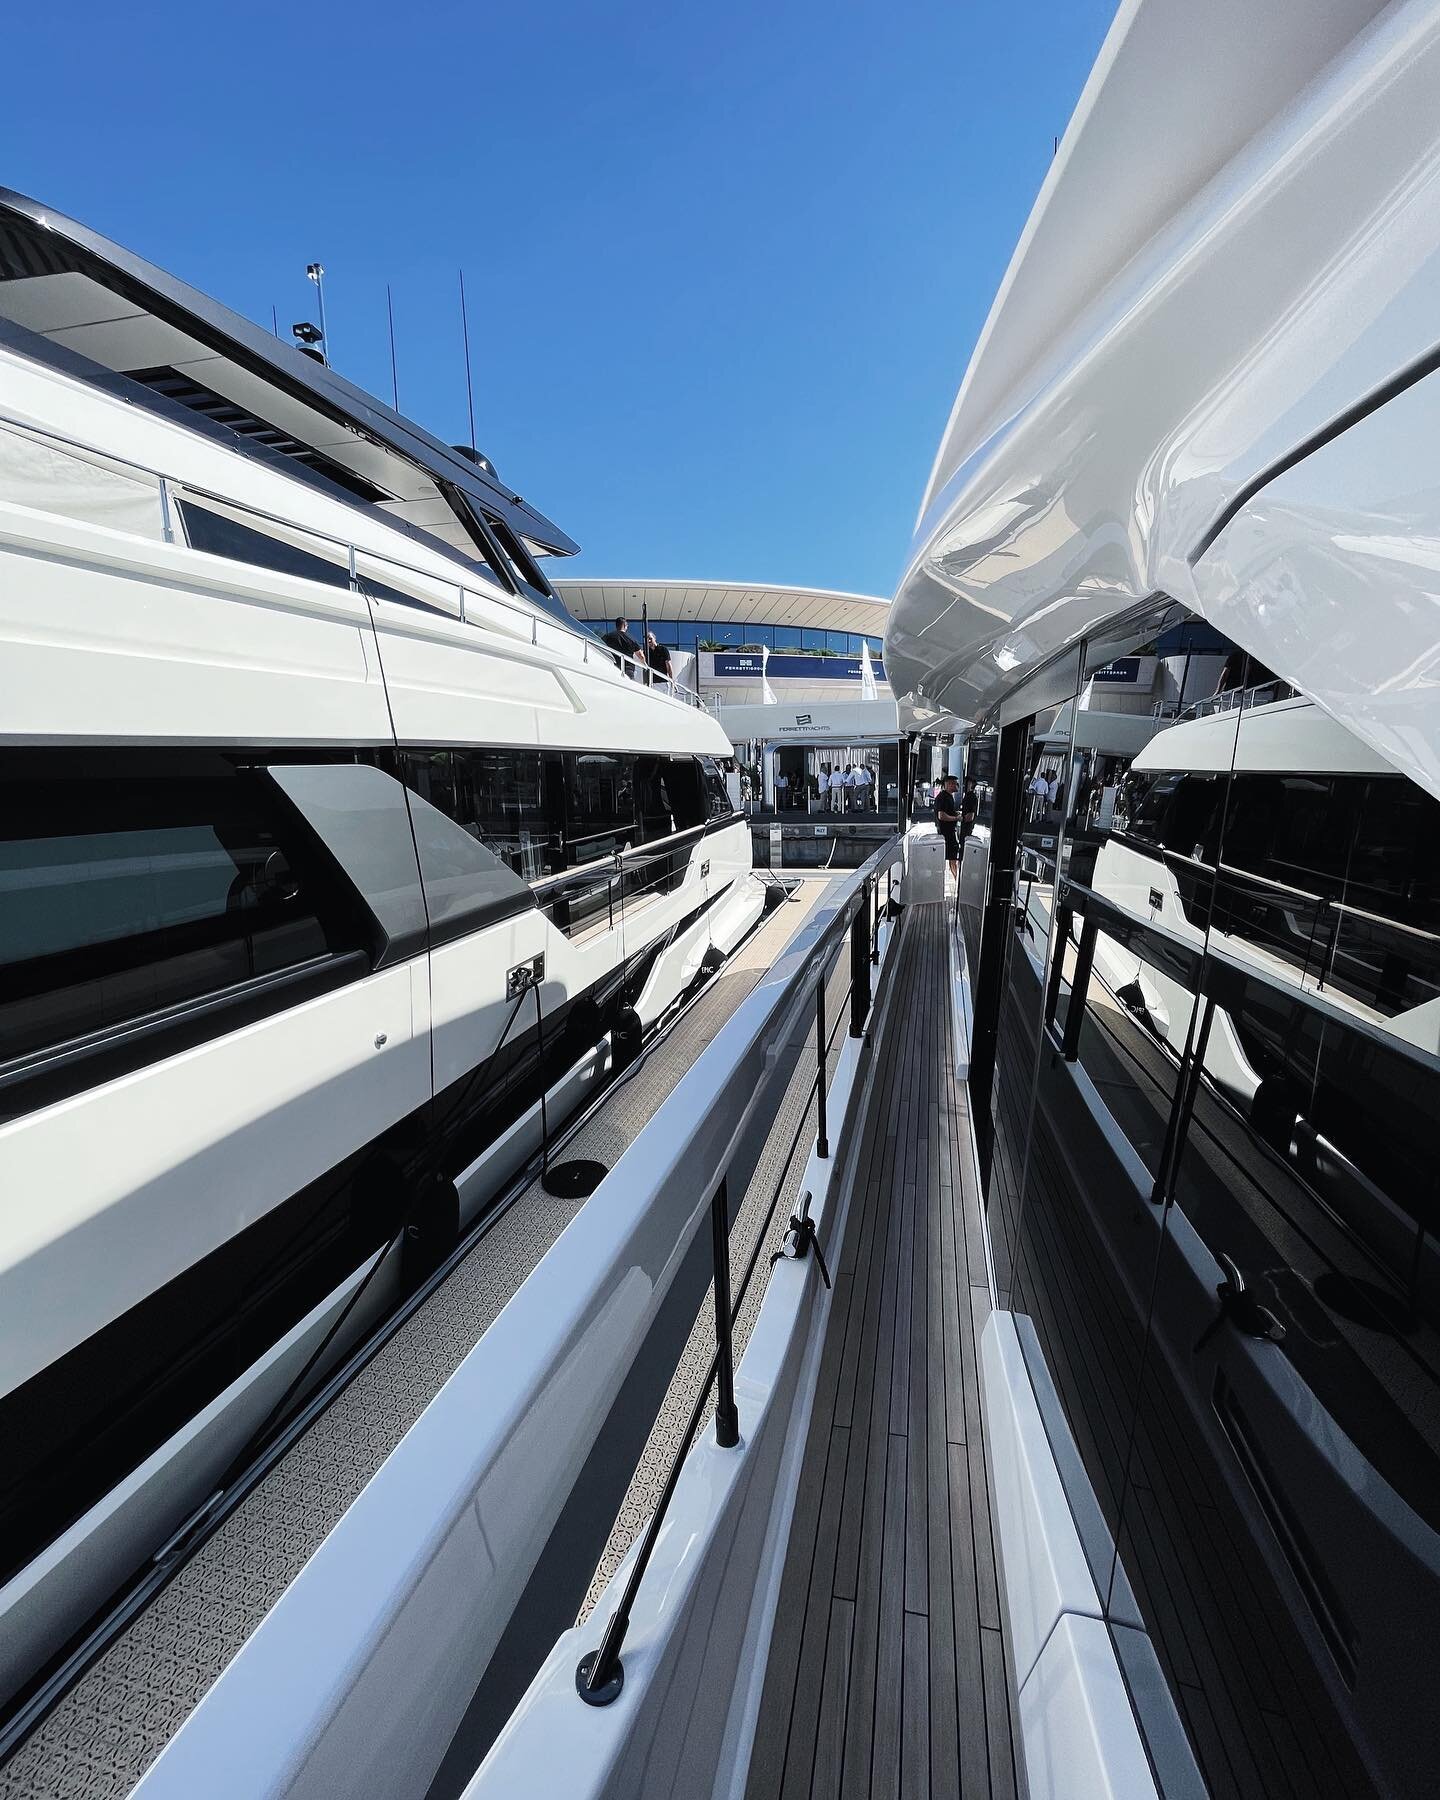 Cannes Yachting Festival 2022 was a blast. 

Huge display of @ferrettigroup yachts and world premiere for @ferrettiyachts 860, @customlineyacht 140 and @itamayacht 62RS.
Special thanks to @mennyacht and all clients who visited us this year.